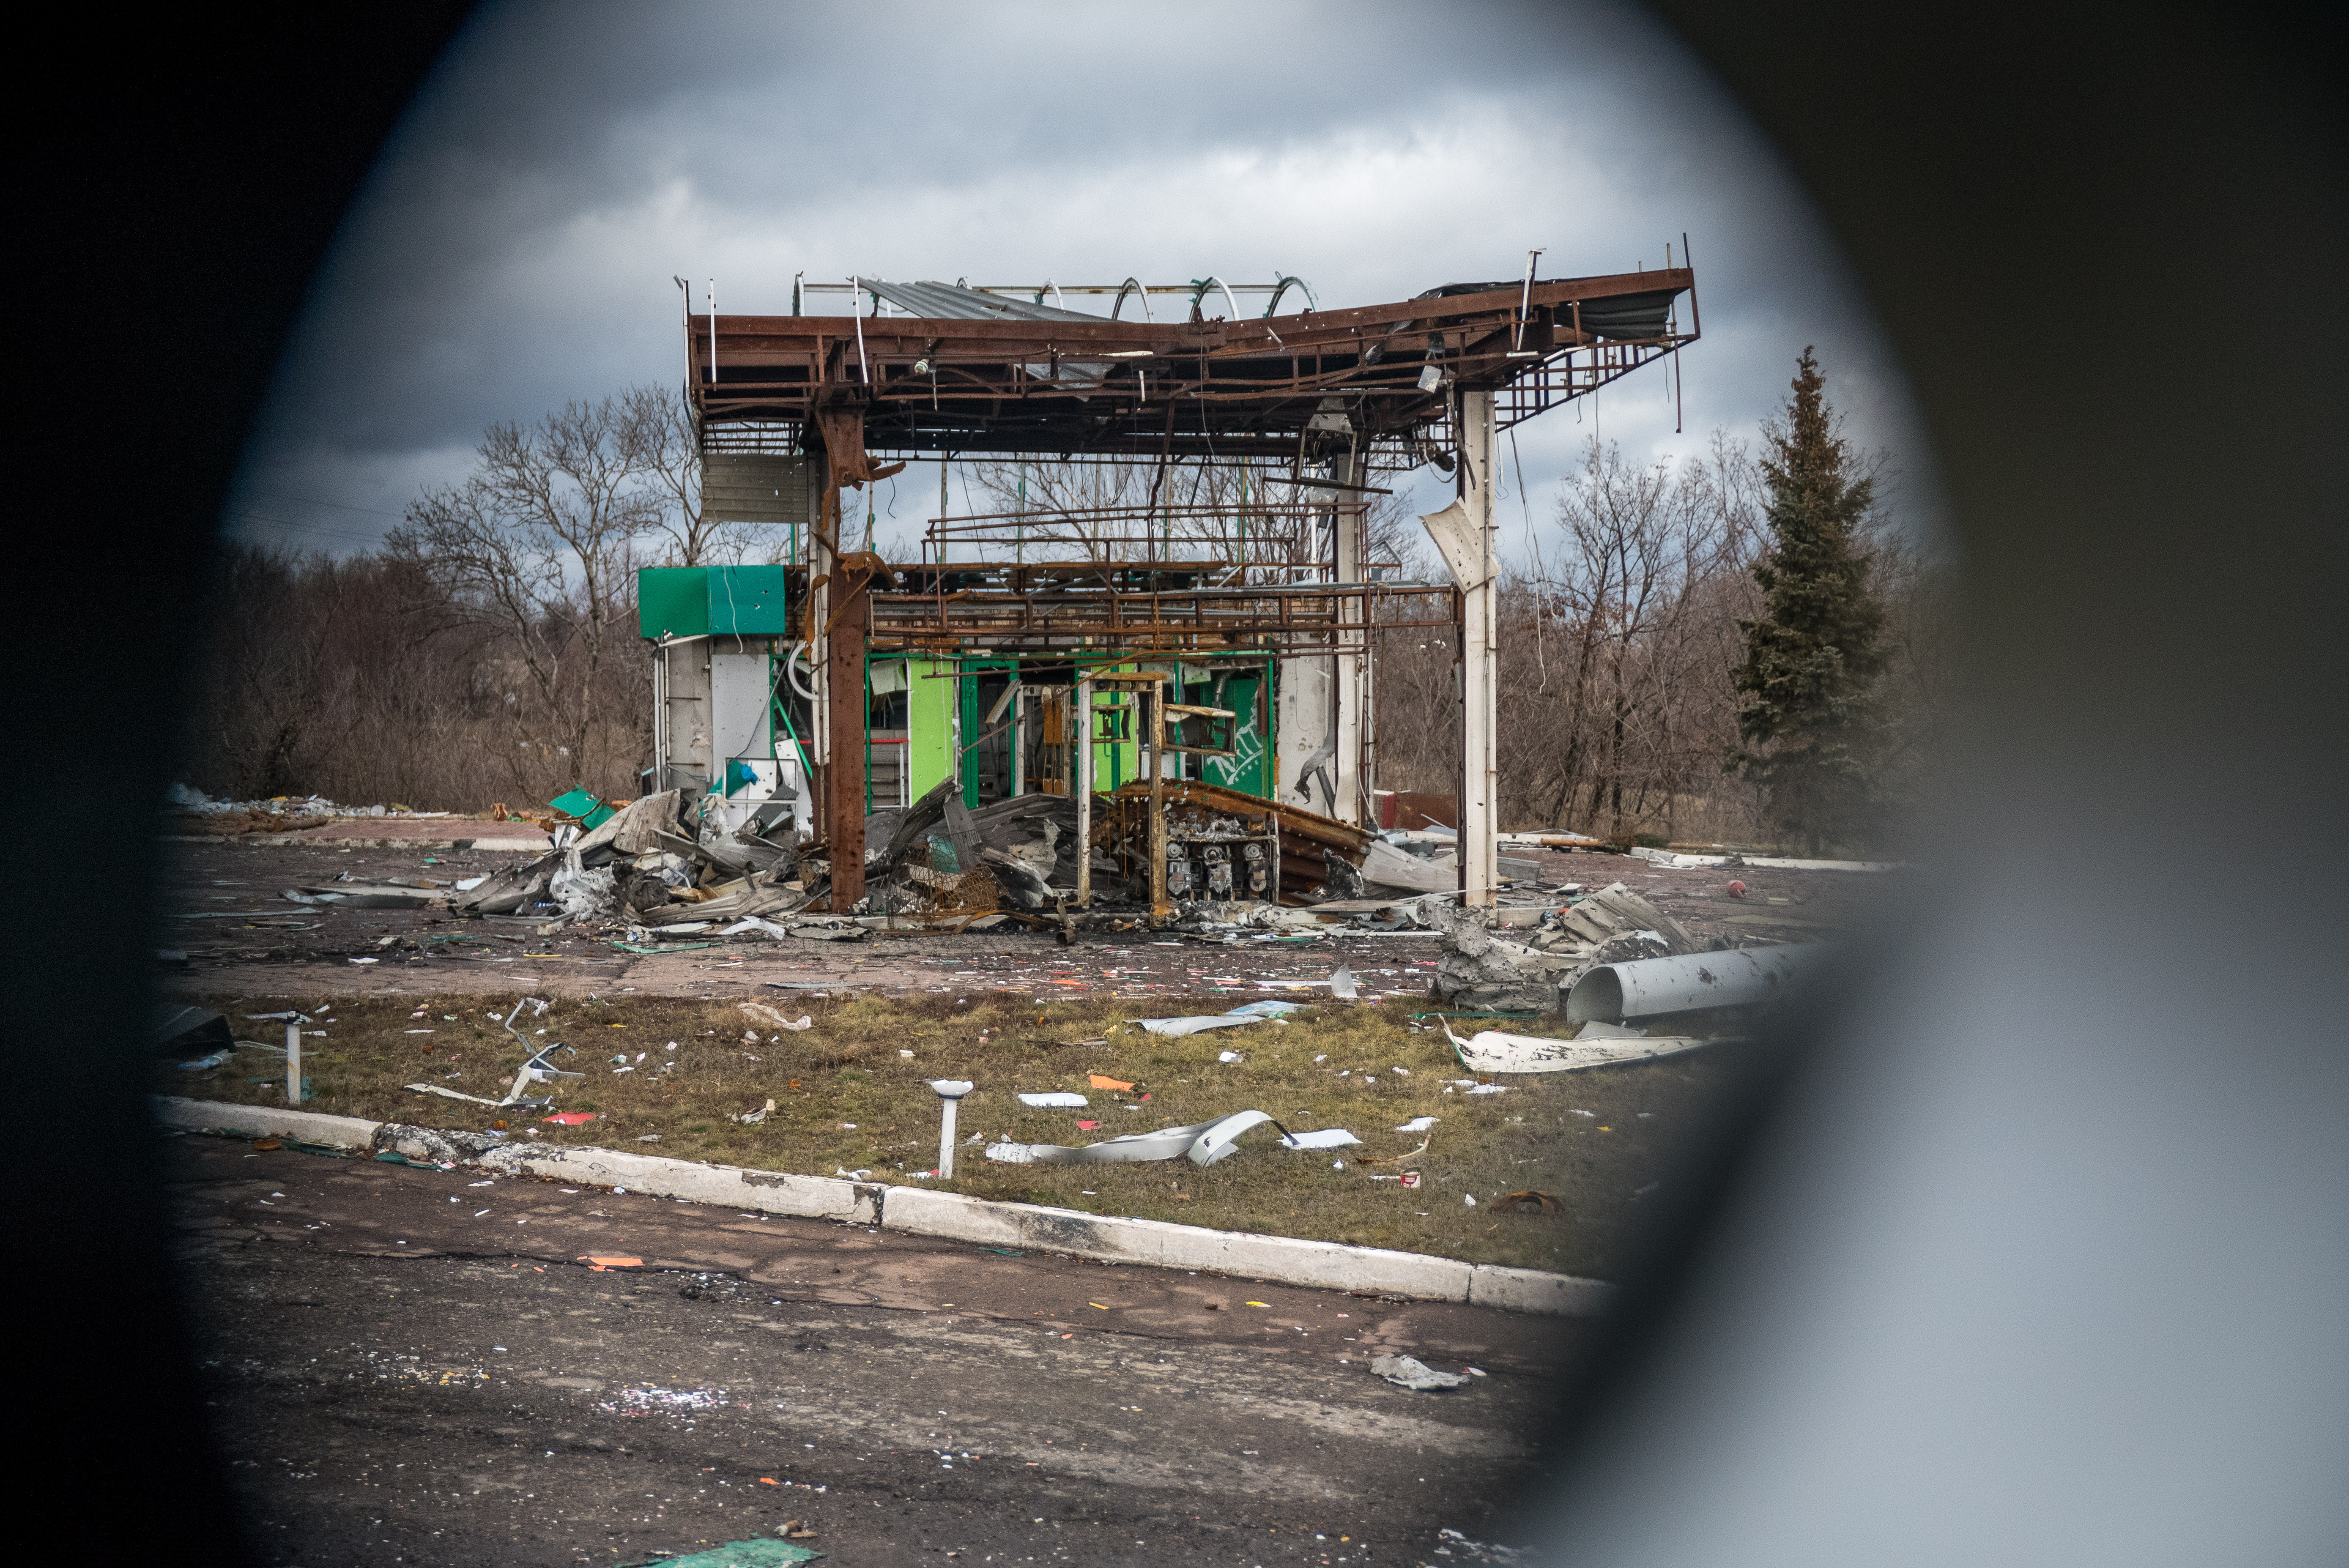 12/25: The remains of a gas station near Debaltseve as seen through the gun port of my armored personnel carrier. (Photo Credit: James Sprankle)